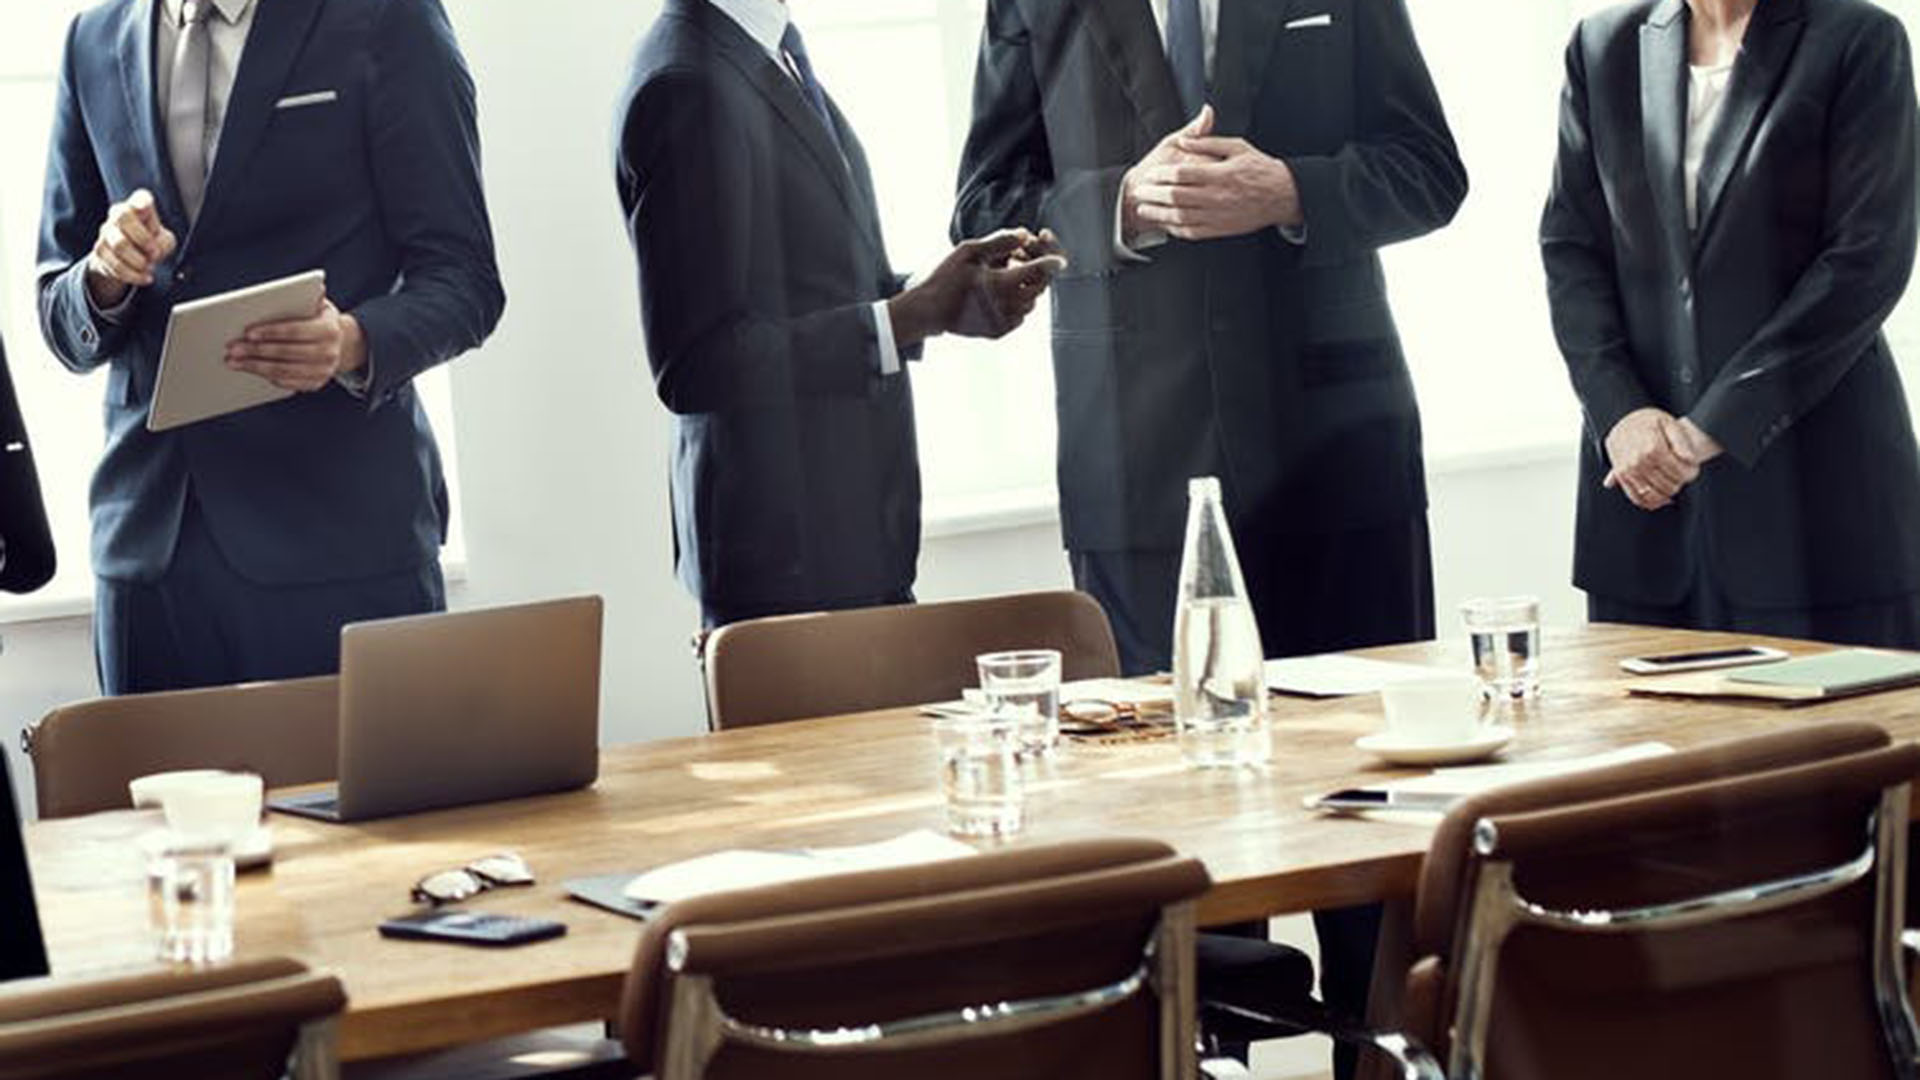 Generic image of men in suits at a meeting table